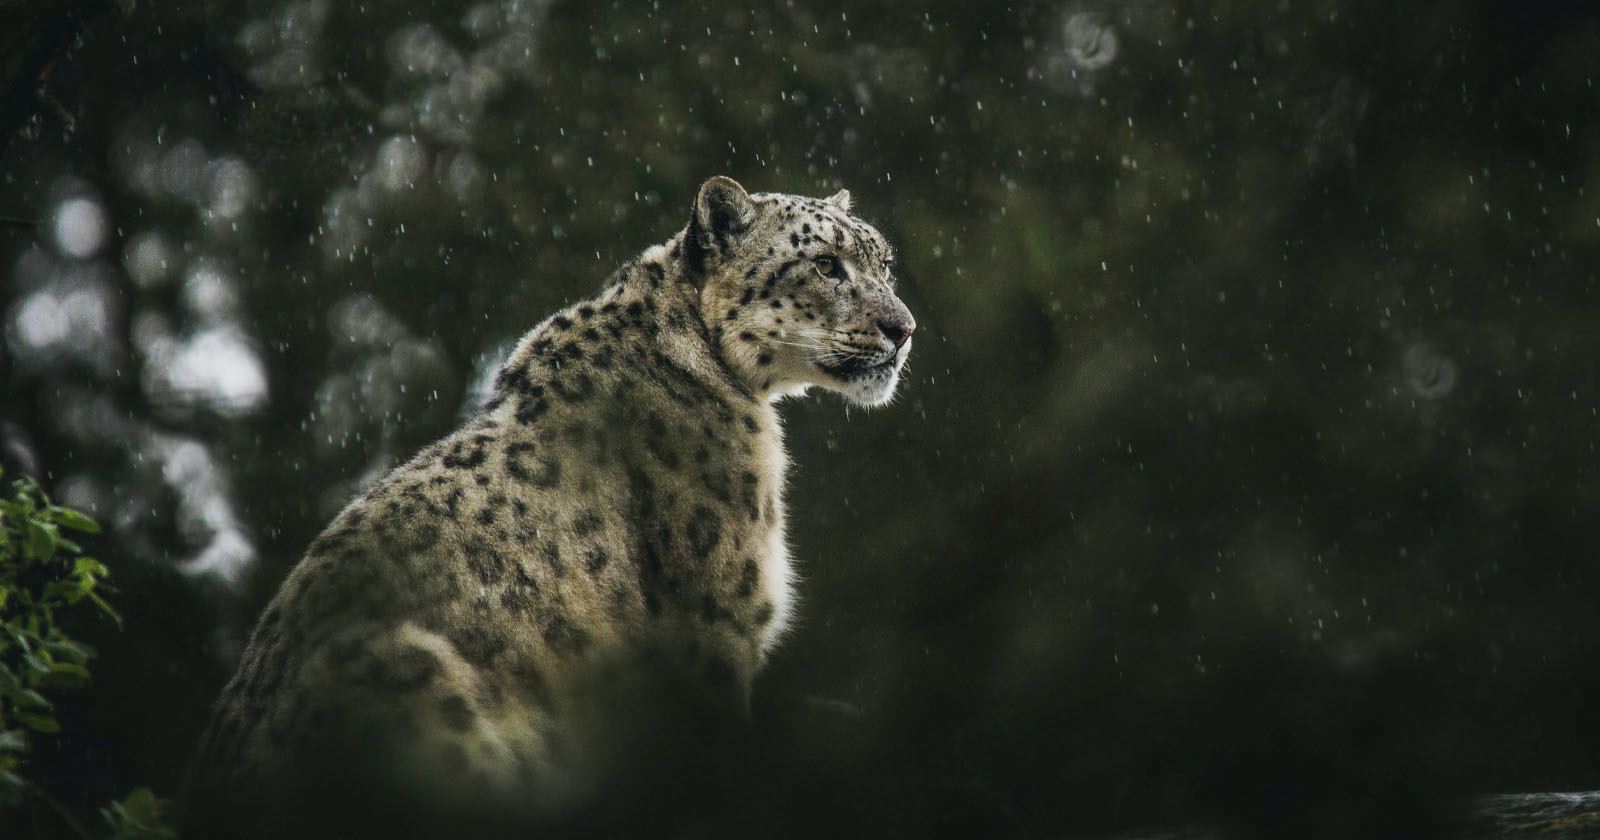 How a Fake Snow Leopard Photo Sparked a Debate on Ethics